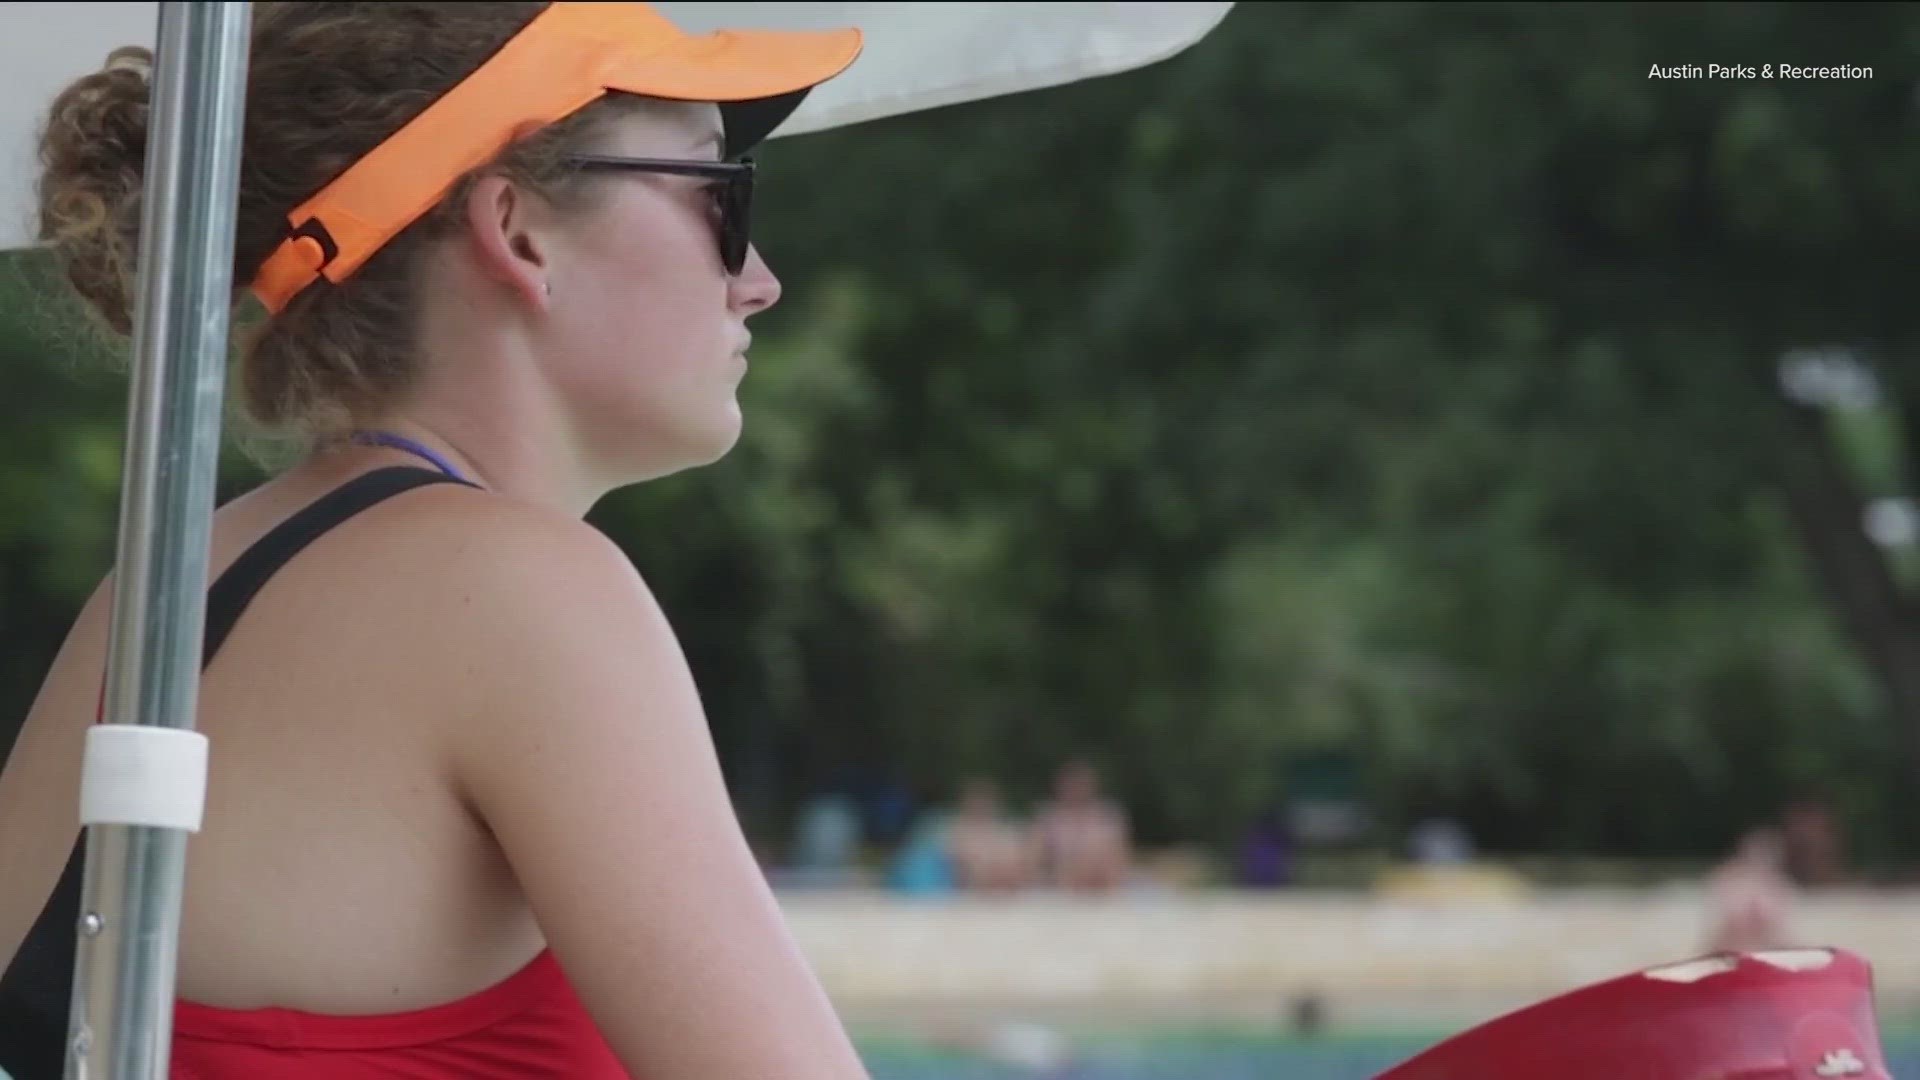 The City of Austin is still working to hire more lifeguards for this summer. KVUE's Dominique Newland has a look at the incentives the City is offering.